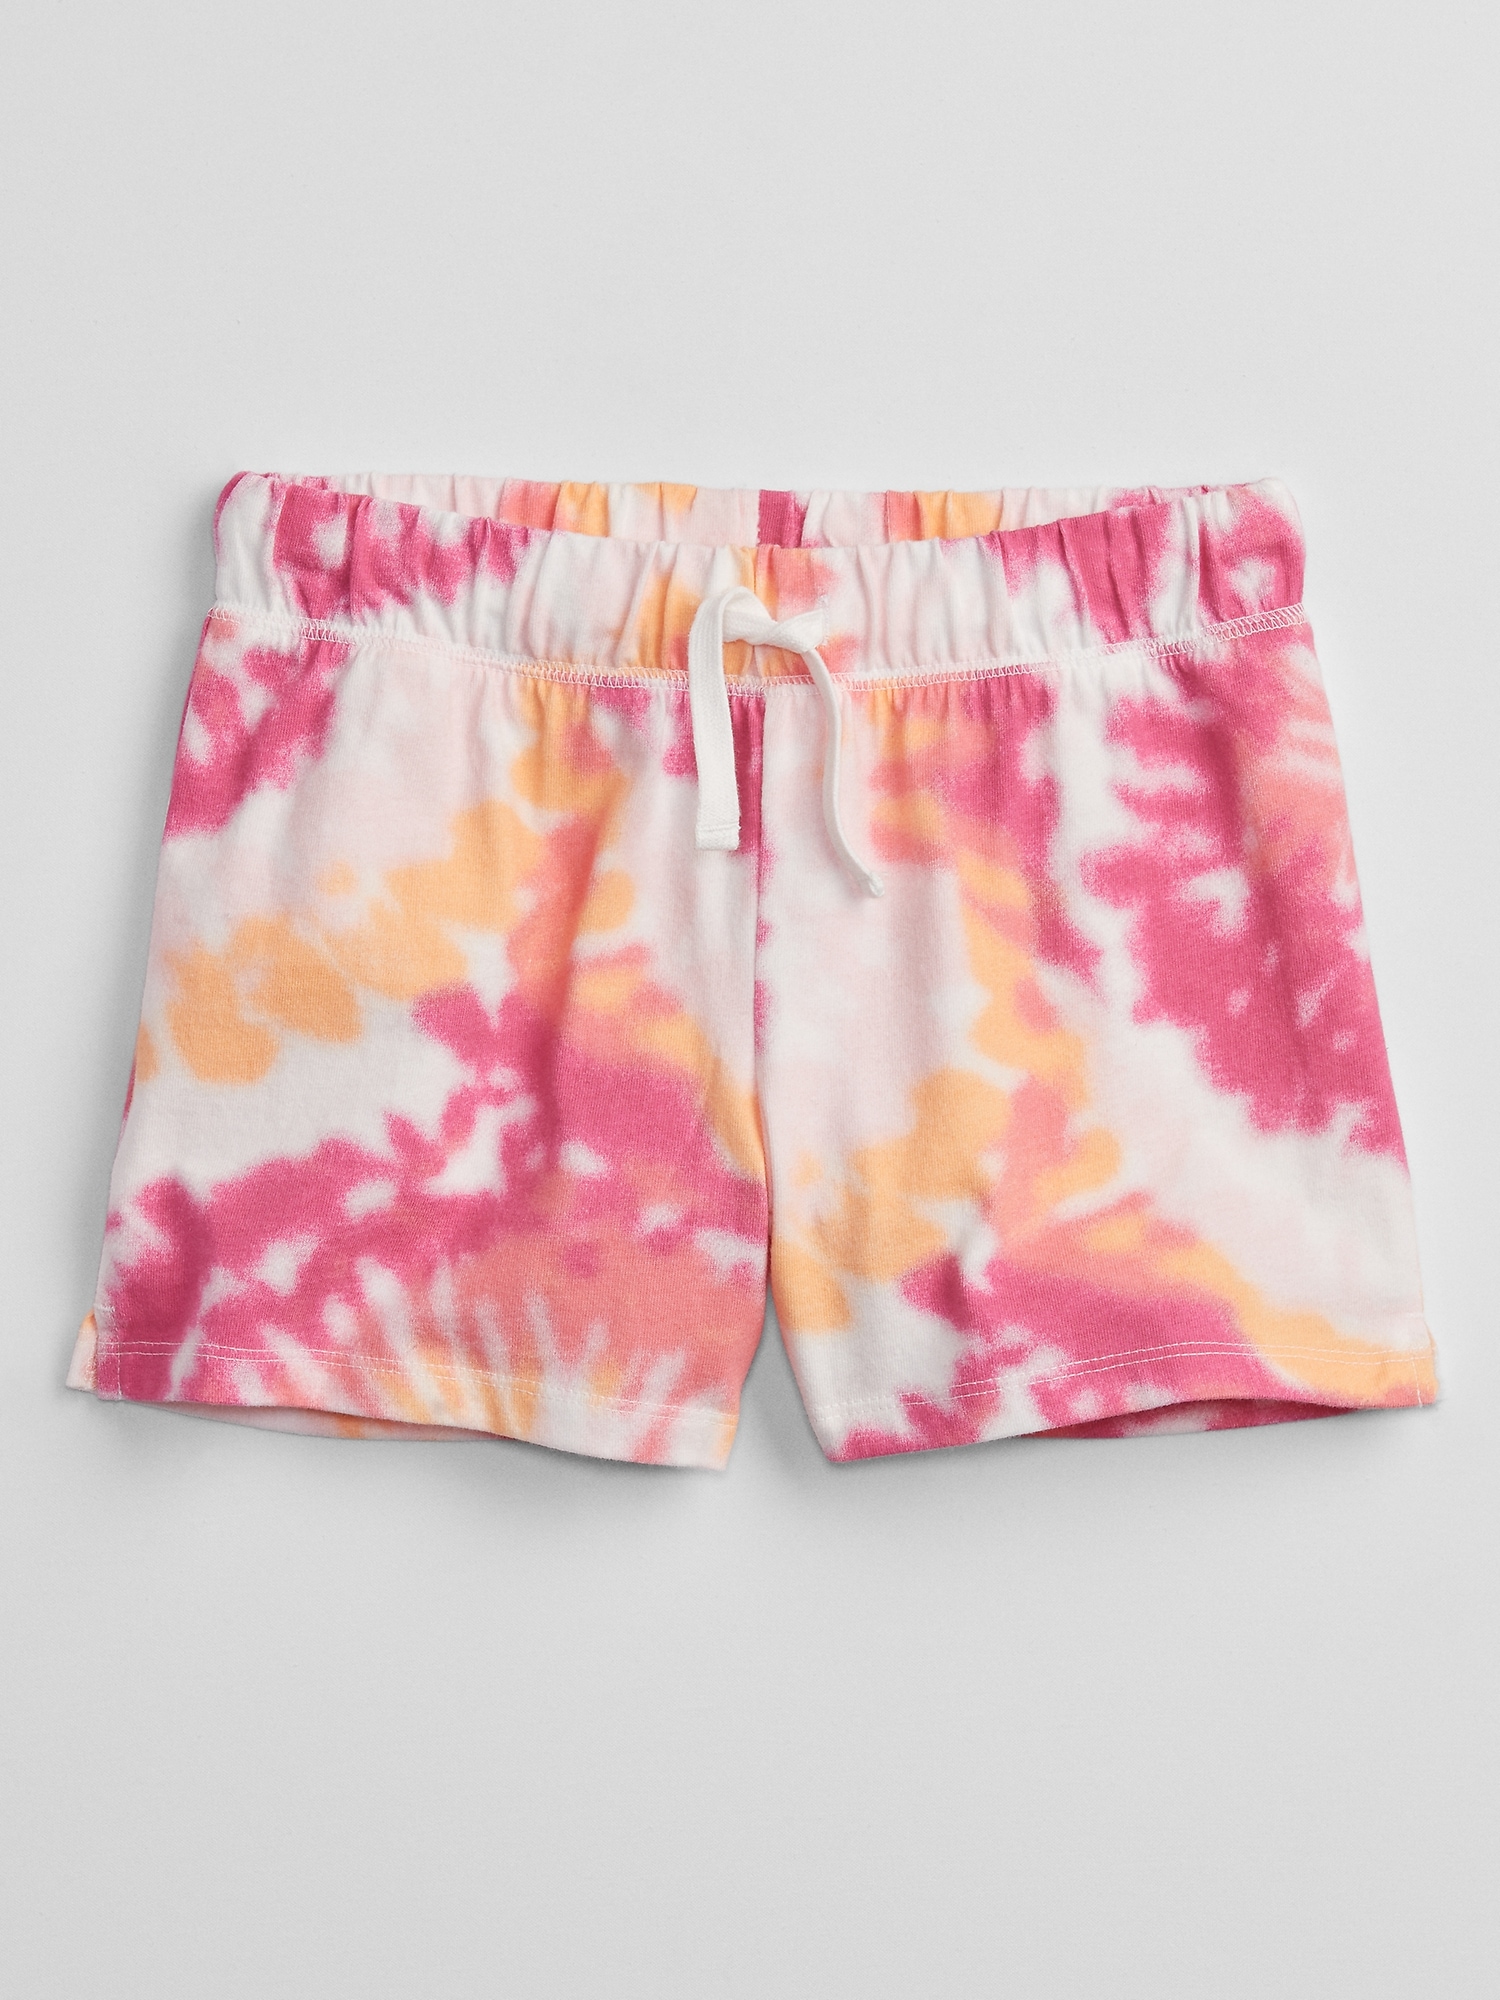 Kids Graphic Pull-On Shorts | Gap Factory